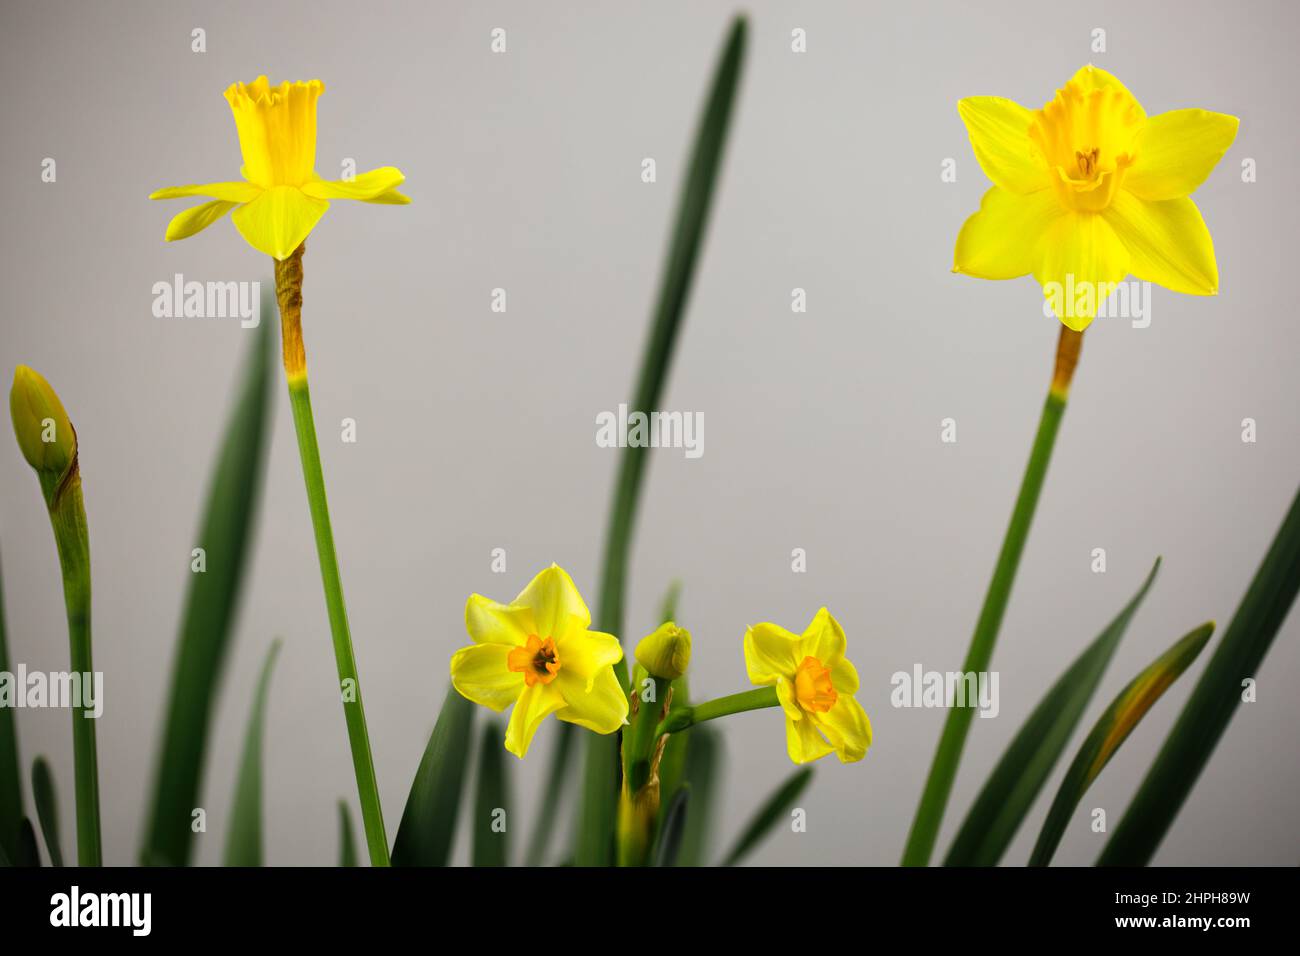 Yellow Narcissus Flowers, Some of the First Springtime Flowers, Indicators that Winter is Over Stock Photo